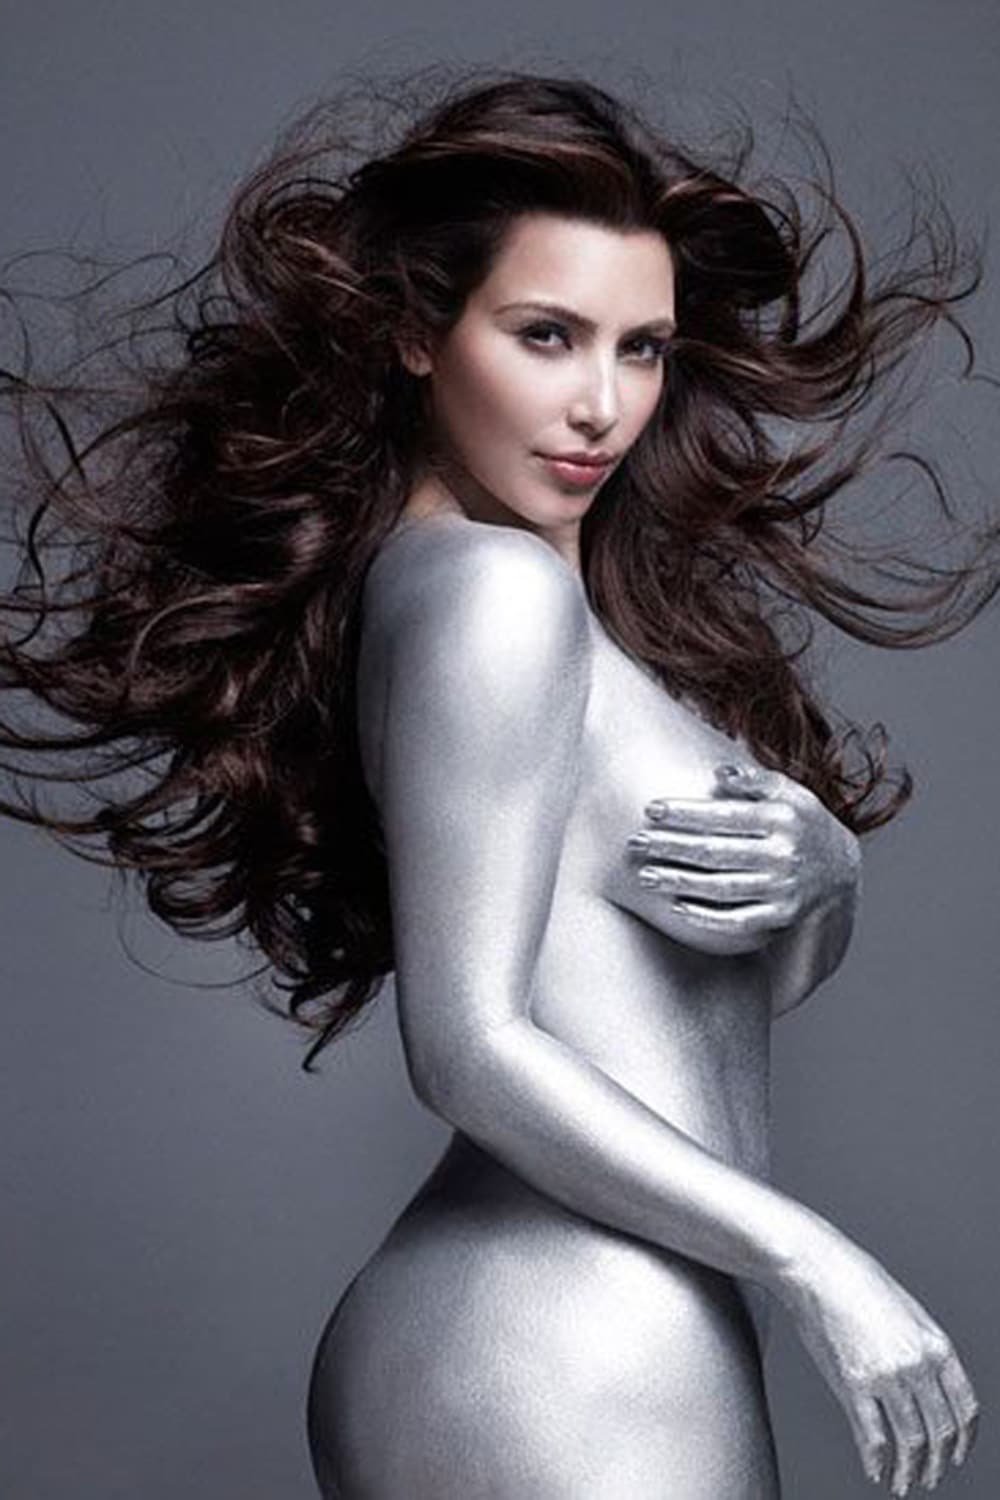 Kim Kardashian dipped in silver pic with her breasts visible